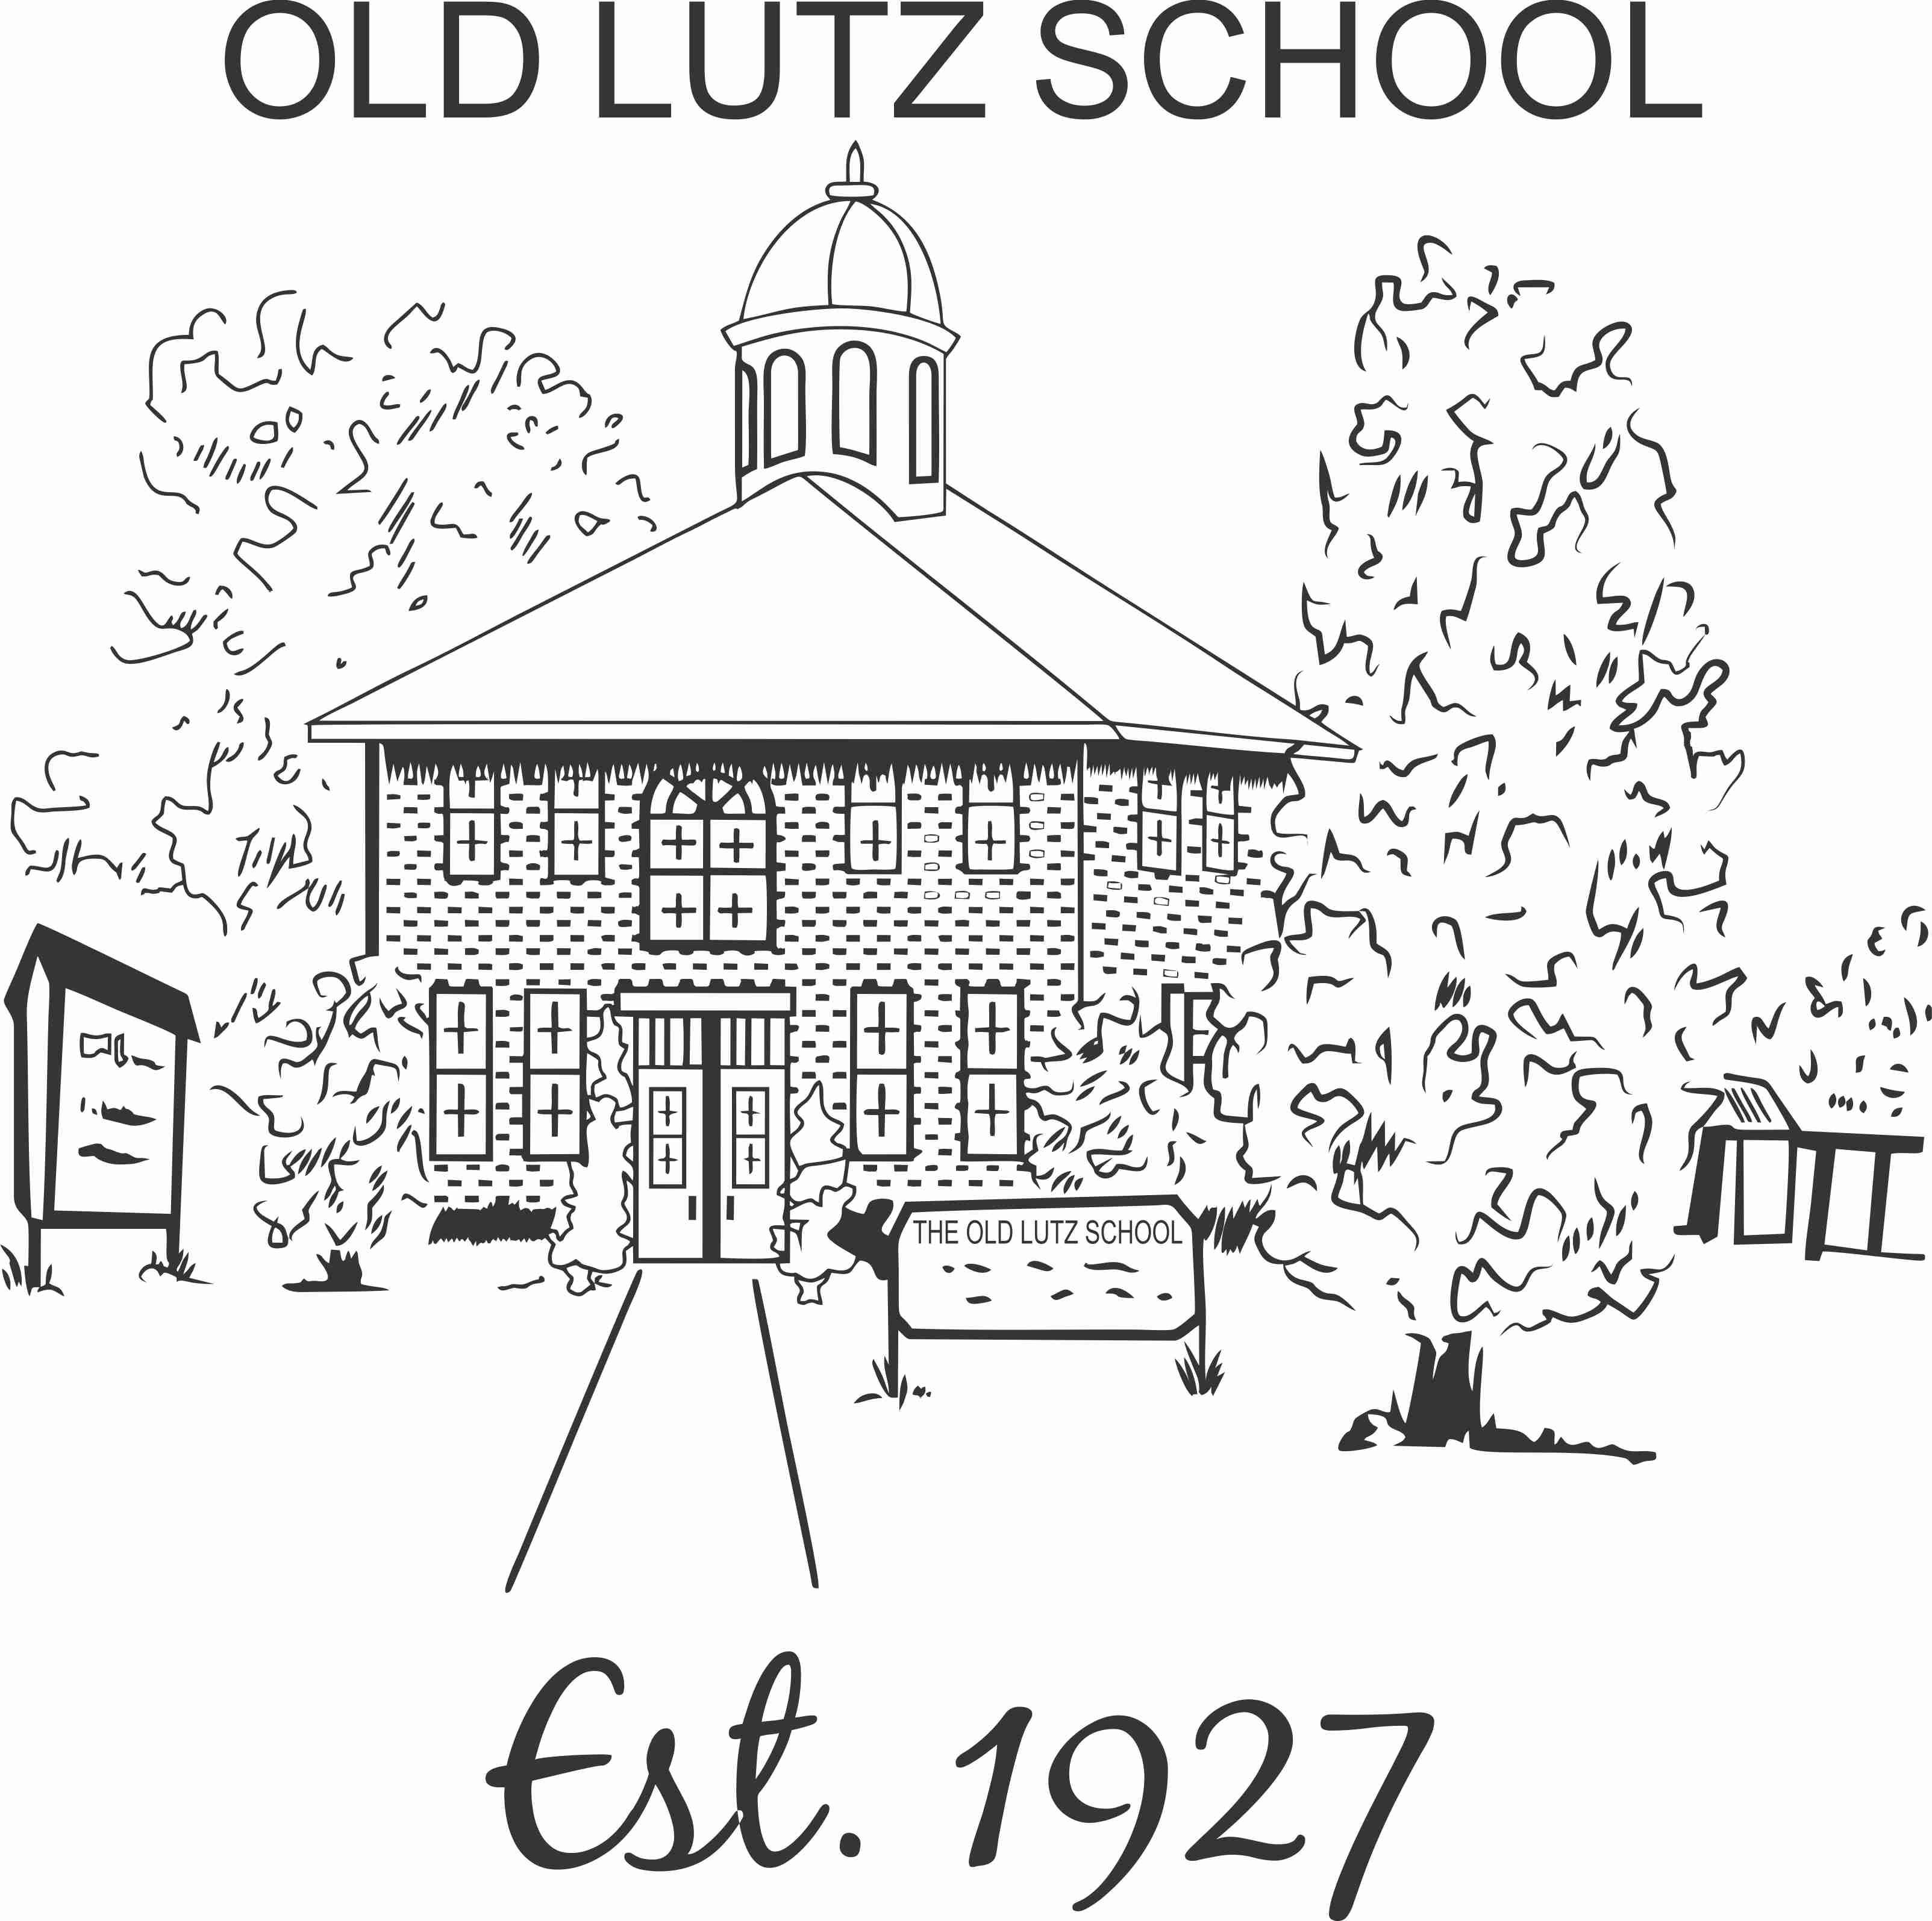 Citizens for the Old Lutz School